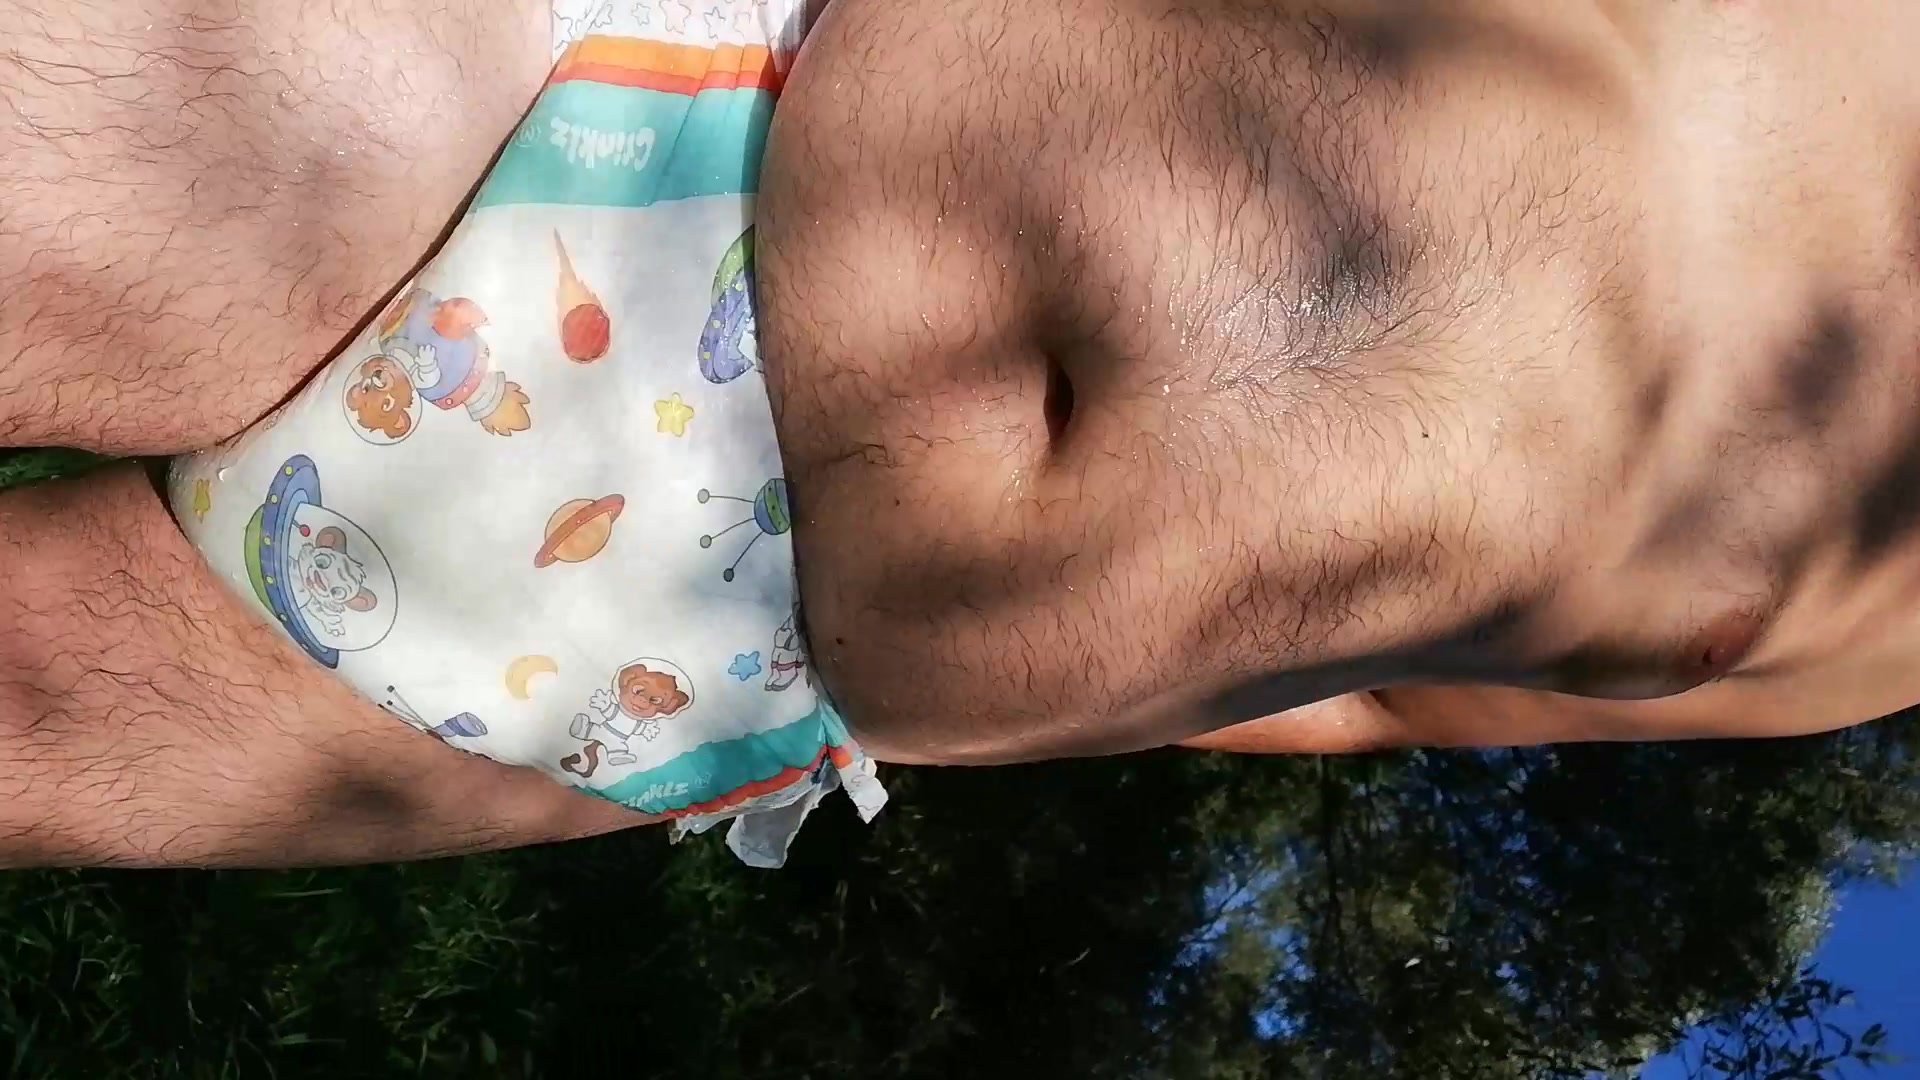 Diapers in public after taking a bath